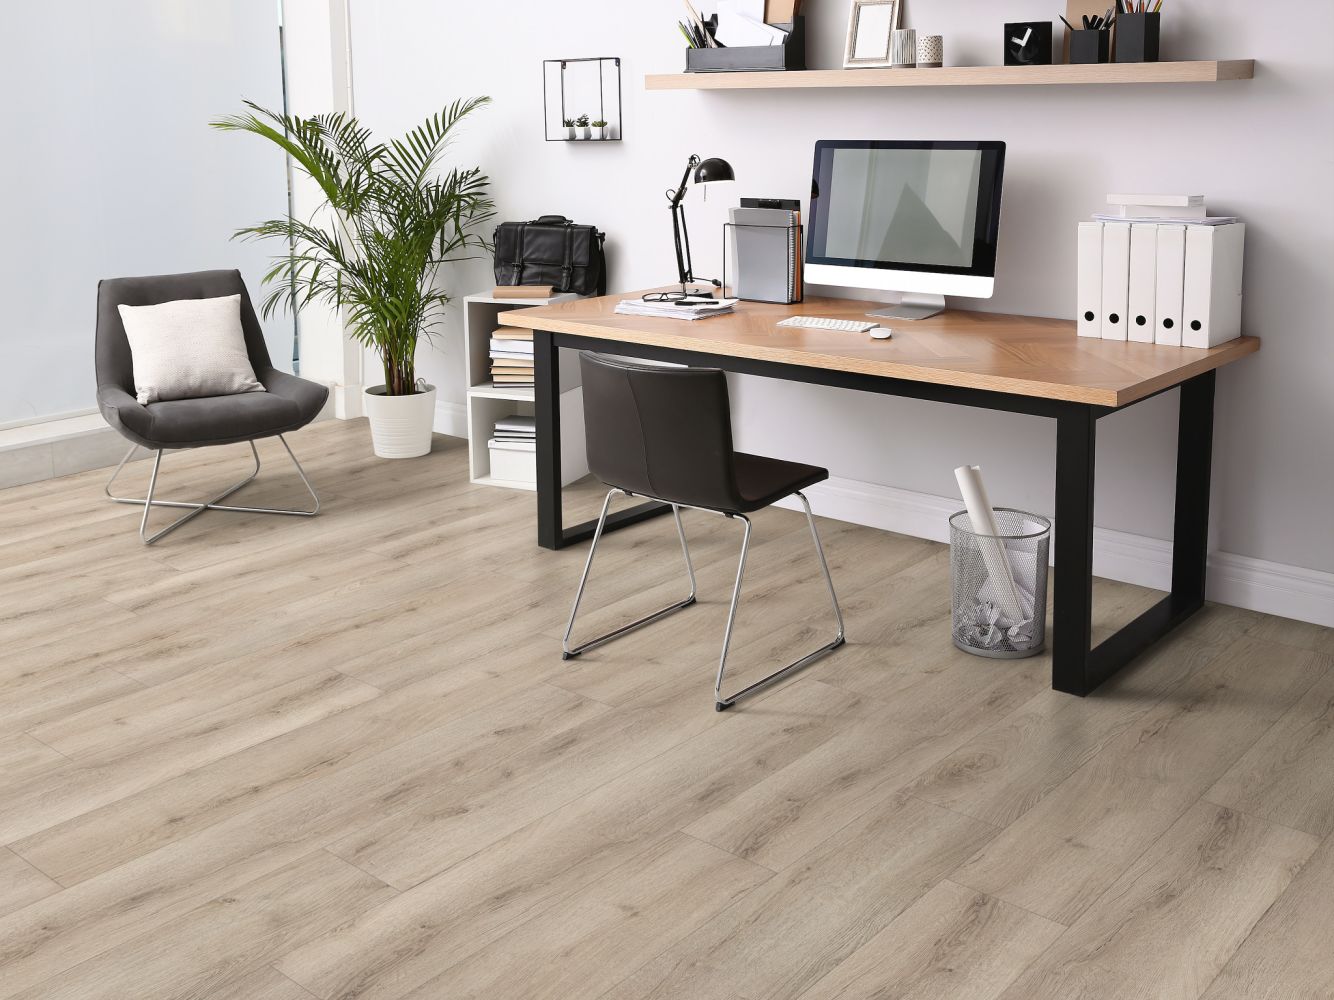 Shaw Floors Resilient Property Solutions Homeward Cashmere Grey 01191_2896V